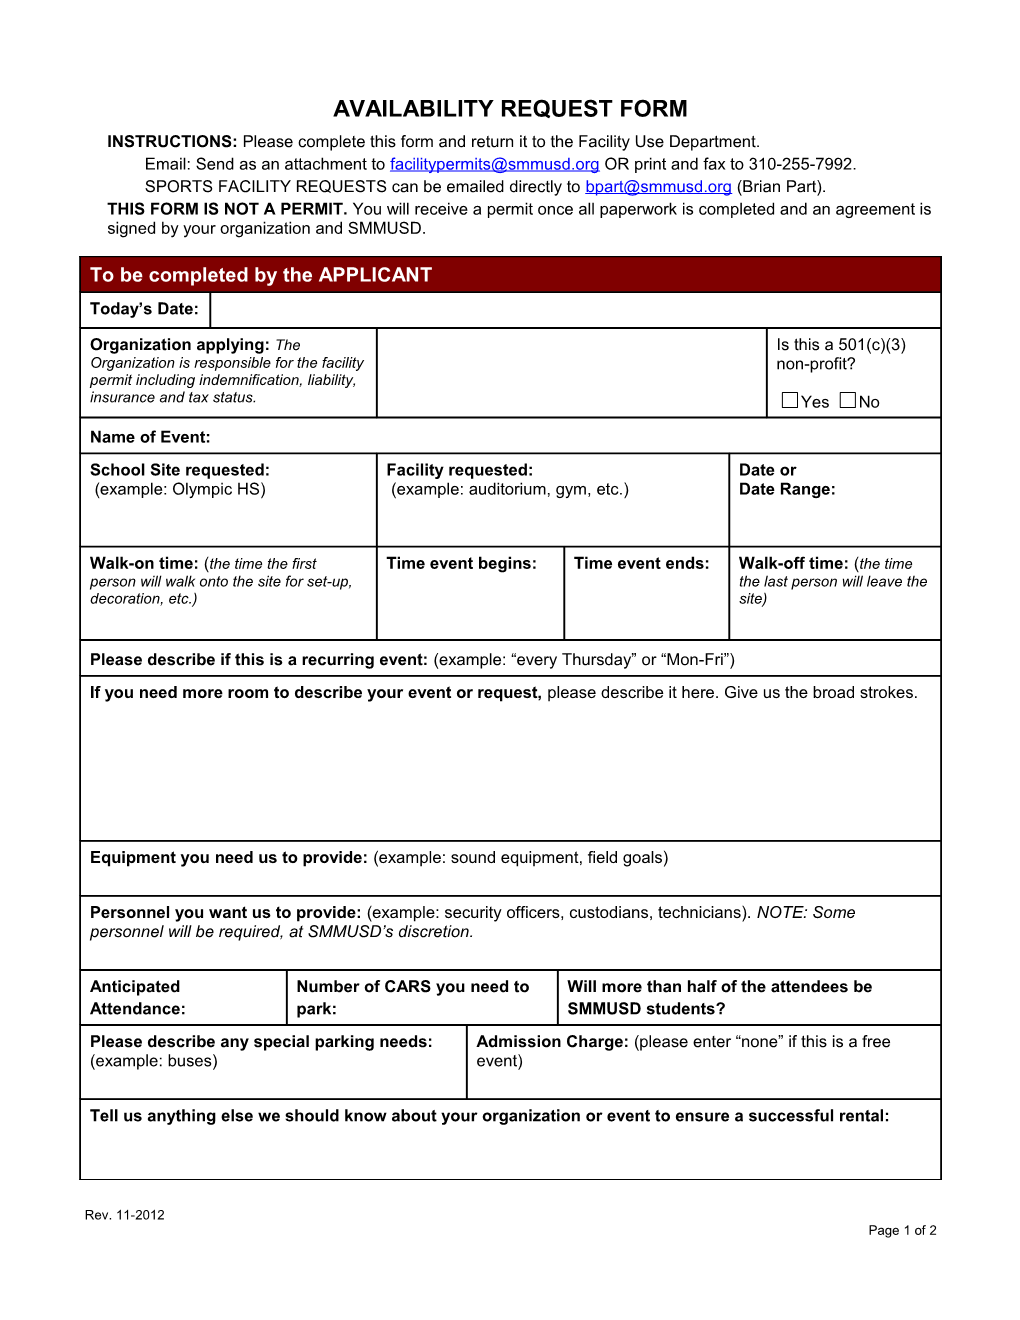 Availability Request Form